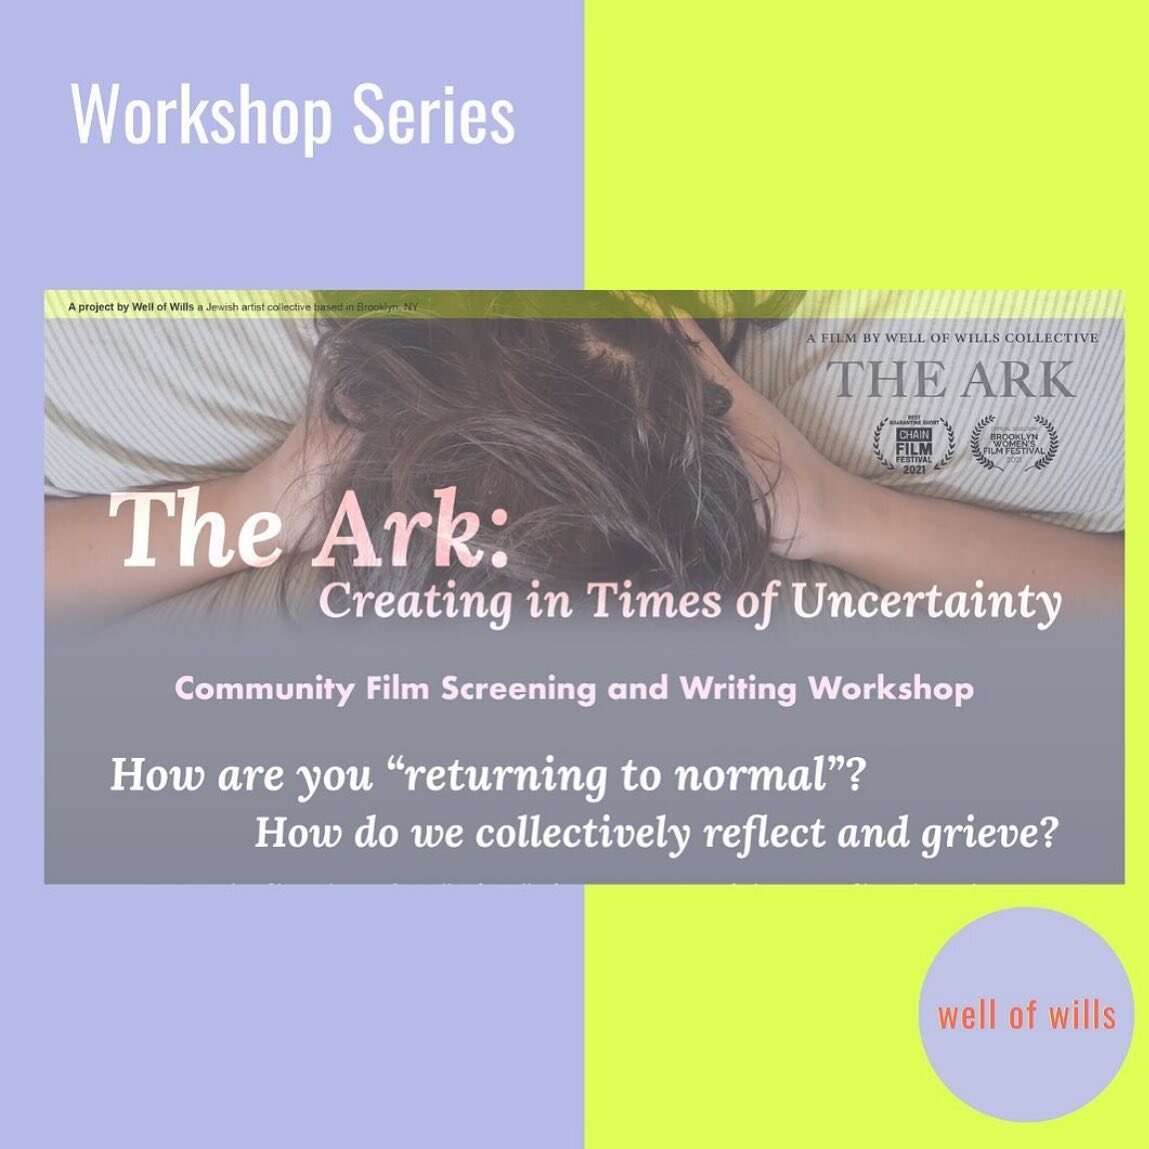 We are so excited to continue offering our workshop The Ark: Creating in Times of Uncertainty to your community! Click the link in our bio to learn more and sign up today.